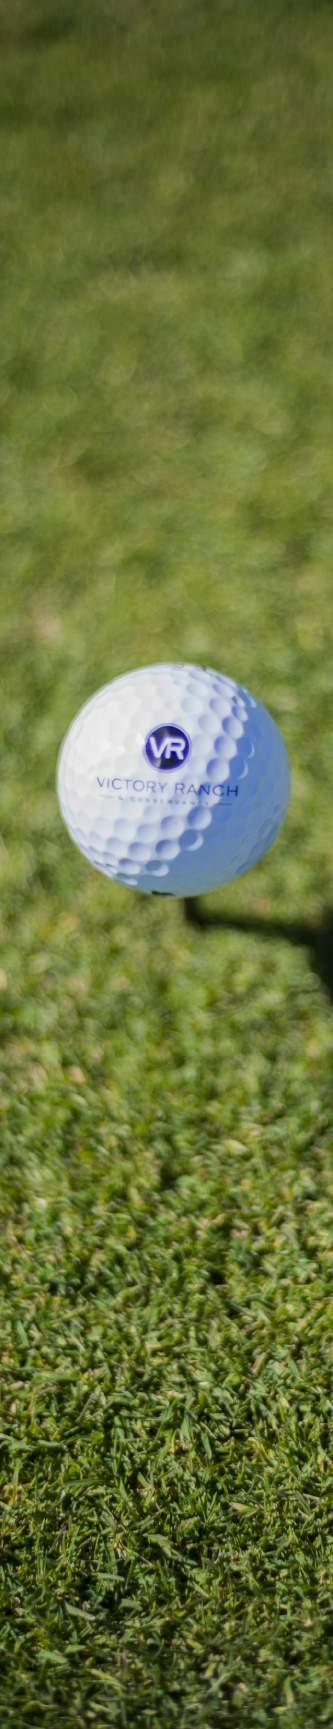 Designed by Rees Jones, the 18 holes at Victory Ranch meander over 7,600 yards of High Country, with bent-grass greens and fairways, bluegrass rough and tall fescue grass lining its boundaries.